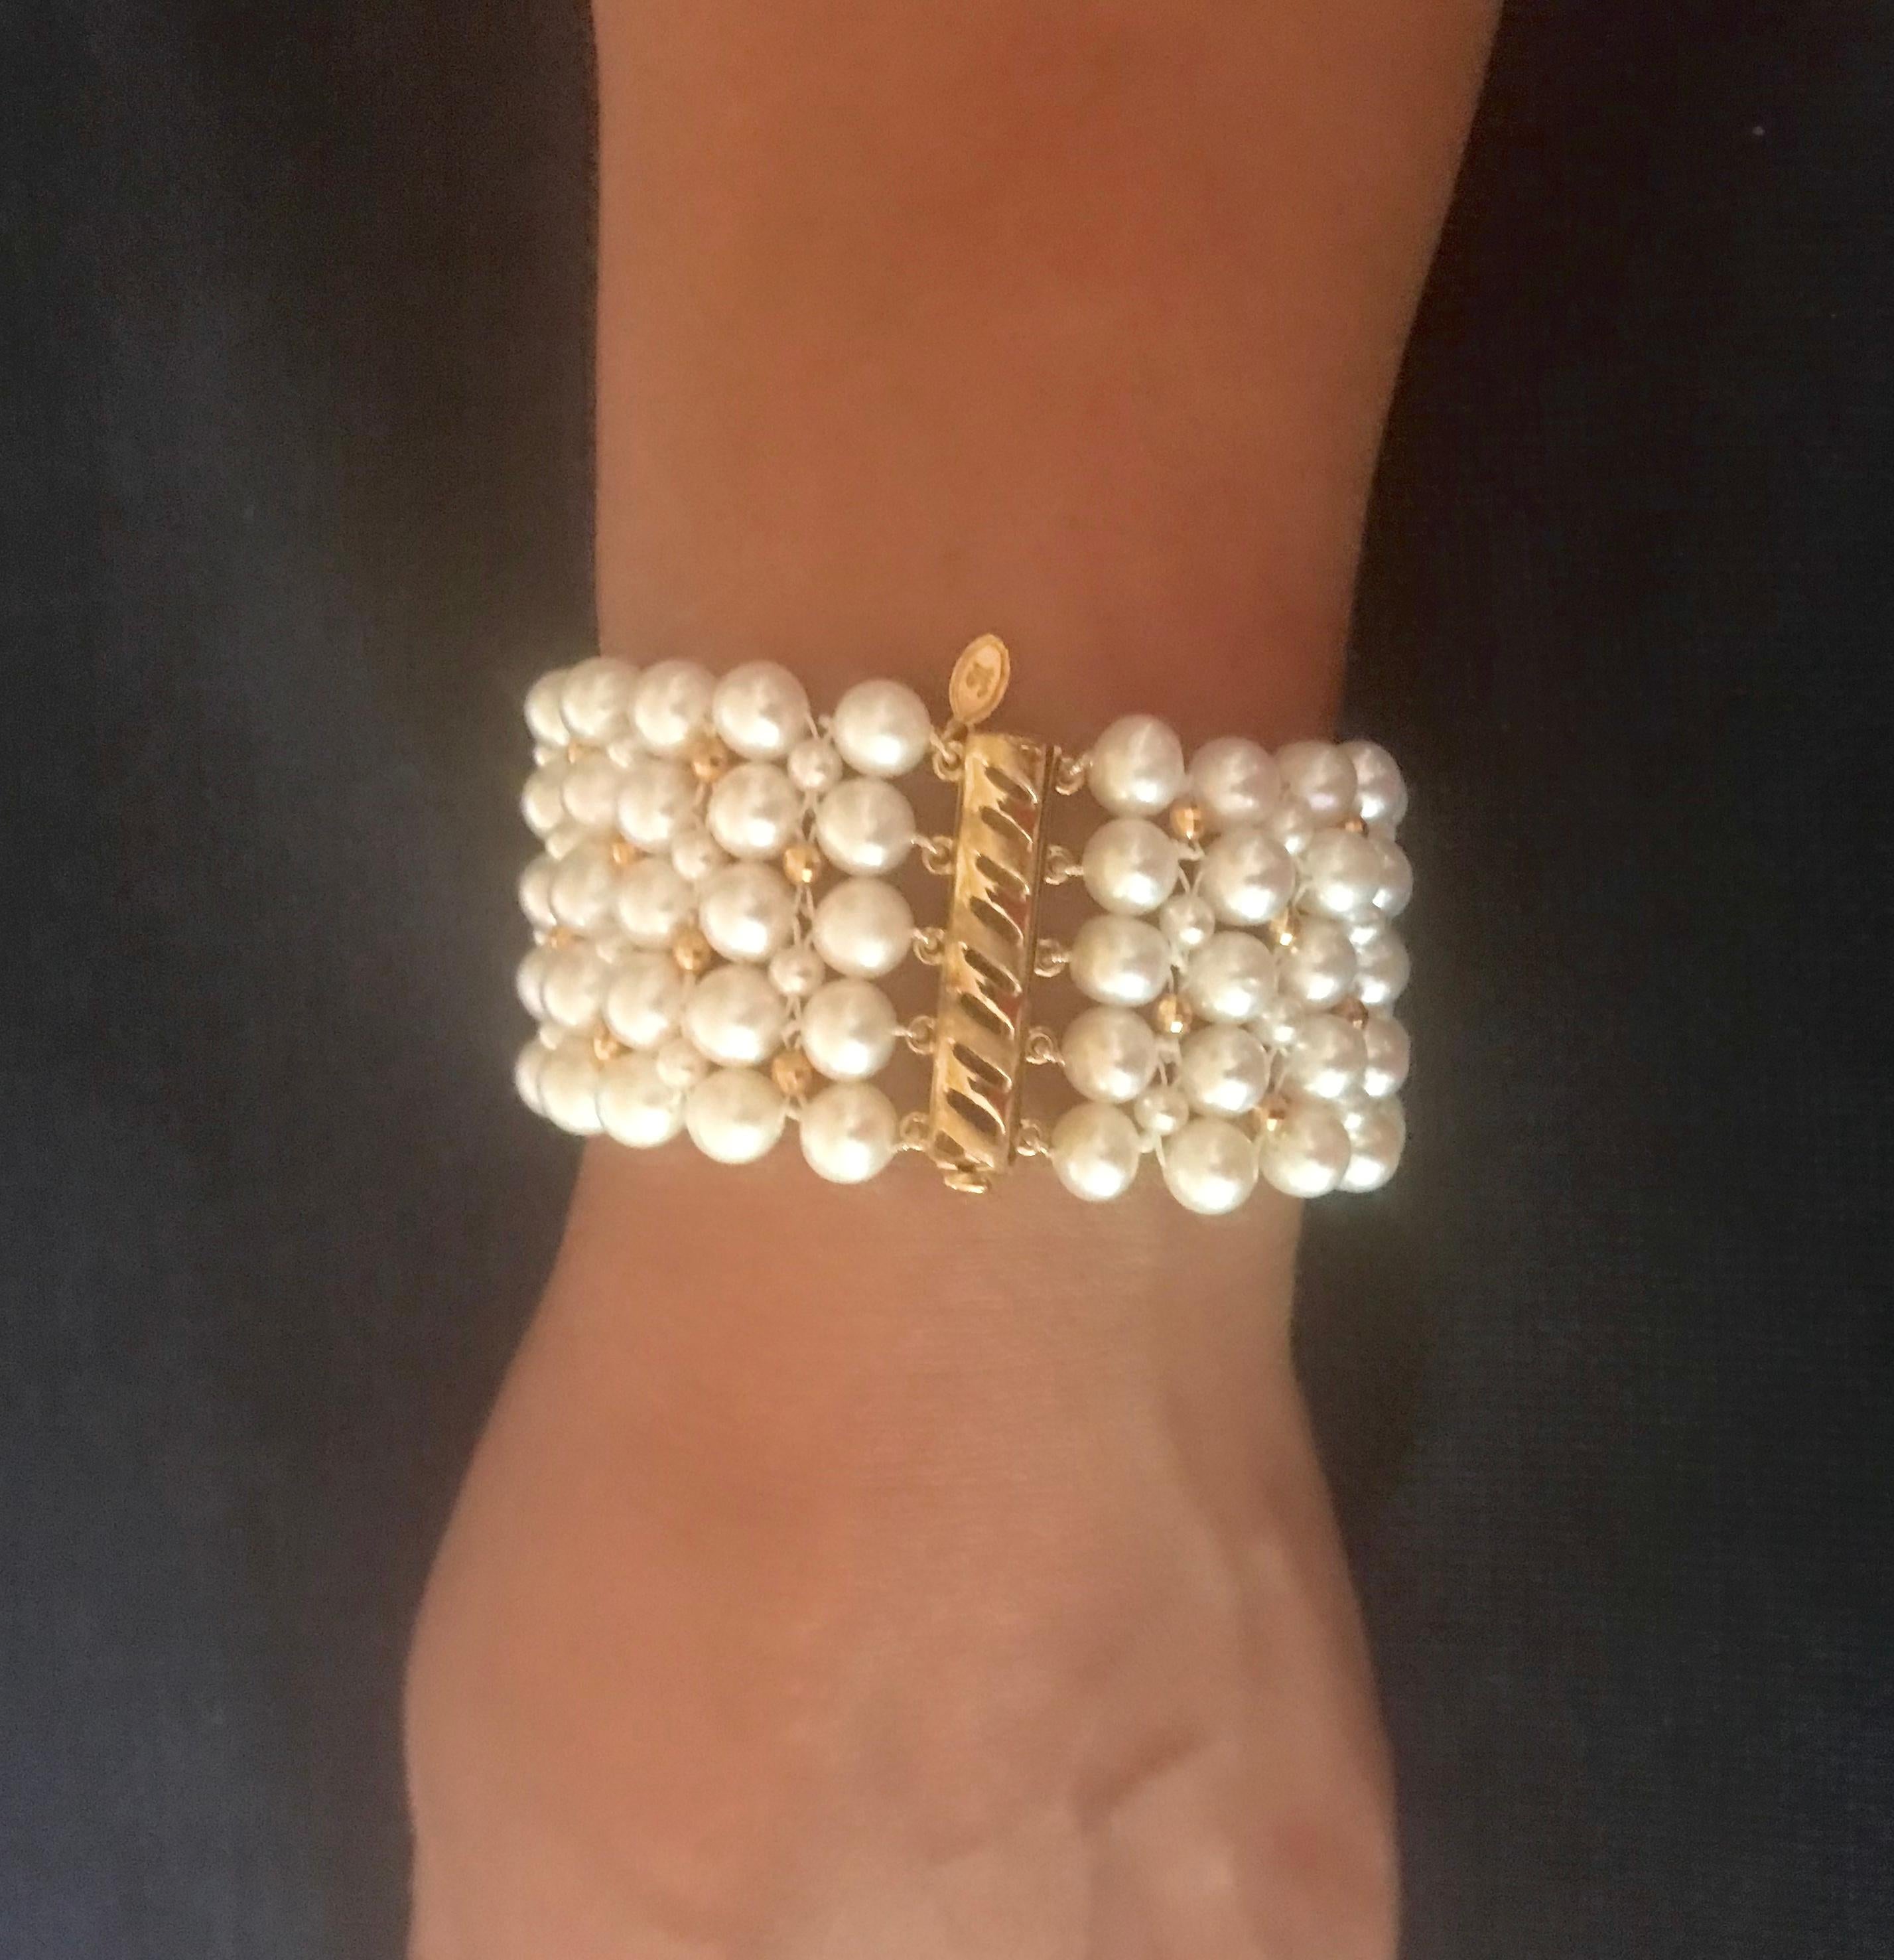 Marina J. Woven Pearl Bracelet with Gold plated Sterling Silver Beads and Clasp  For Sale 2